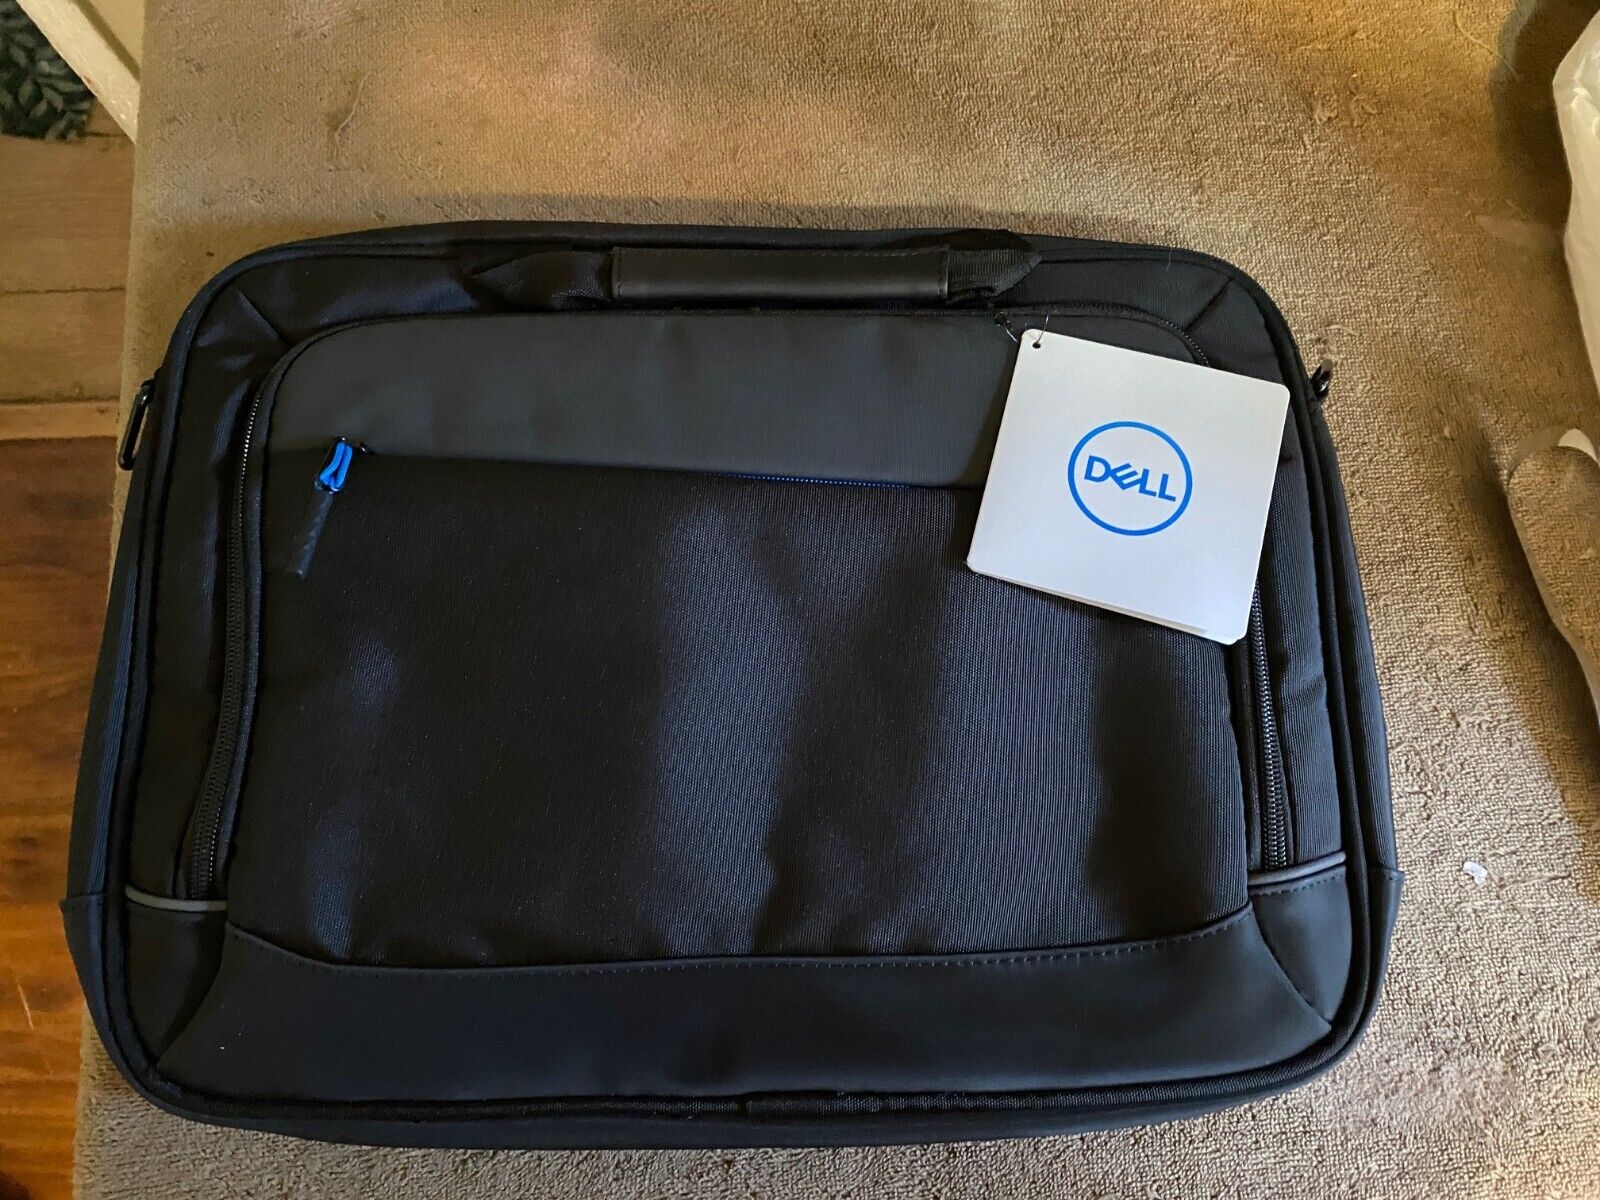 Dell J1V9M Professional Briefcase, Black New laptop Case- NEW WITH TAGS